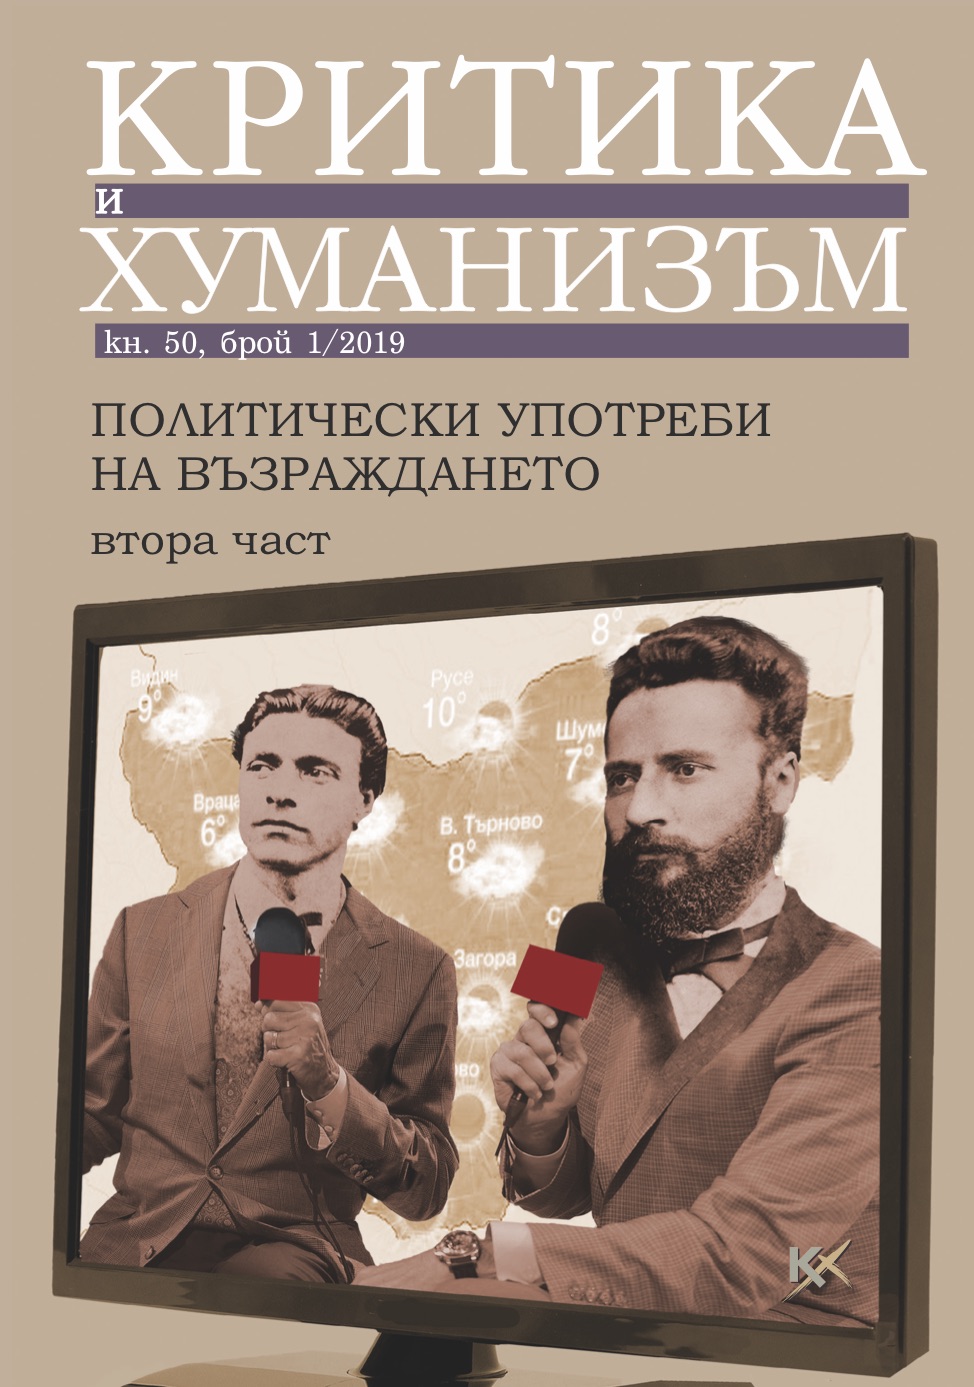 The Death Anniversary of the National Hero (Late Uses of Vasil Levski’s Image:Socialist Fiction, Socialist Press and beyond Them) Cover Image